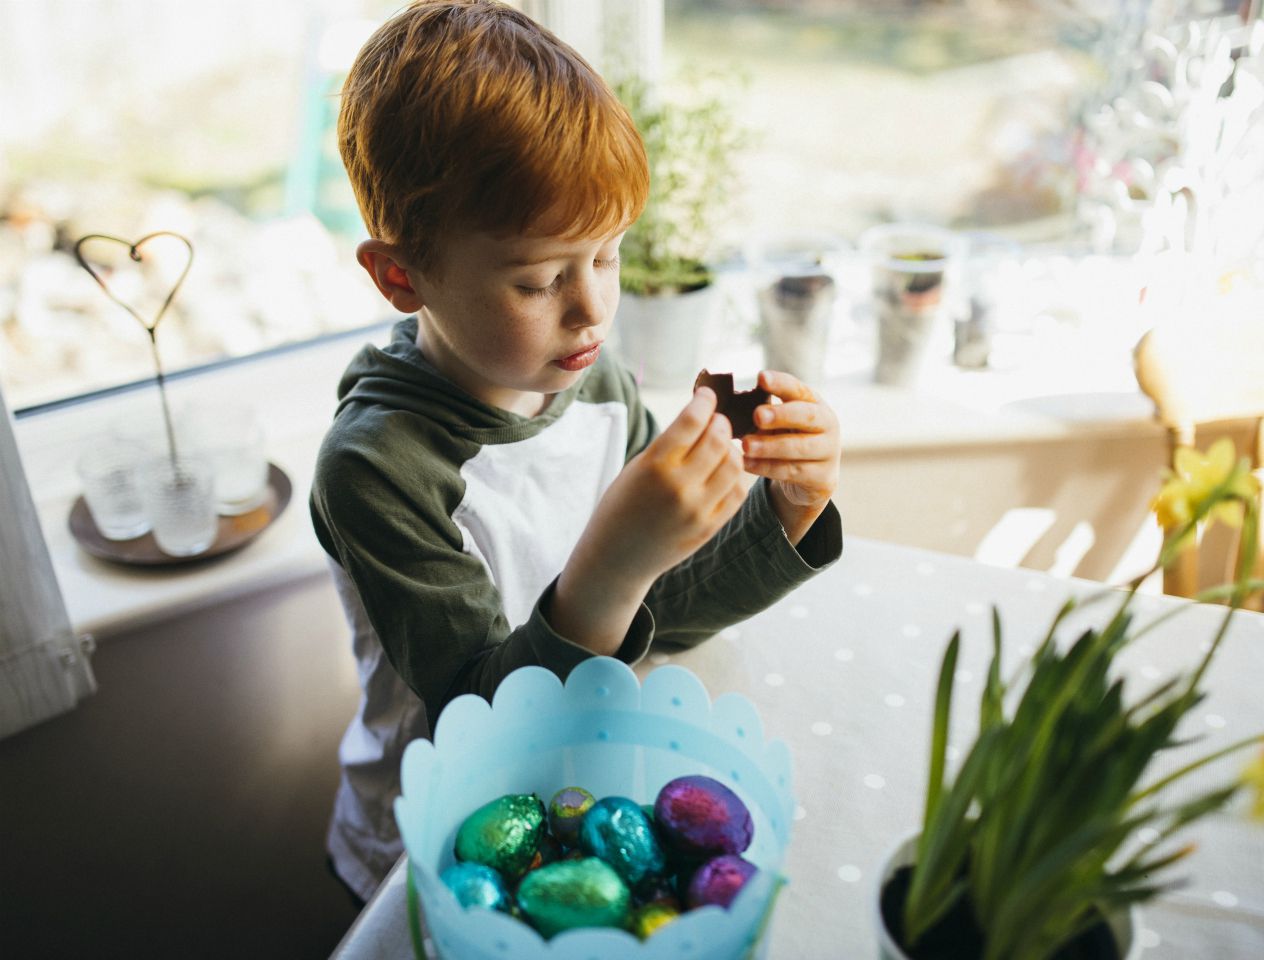 Boy at home with Easter eggs. Image by Getty.